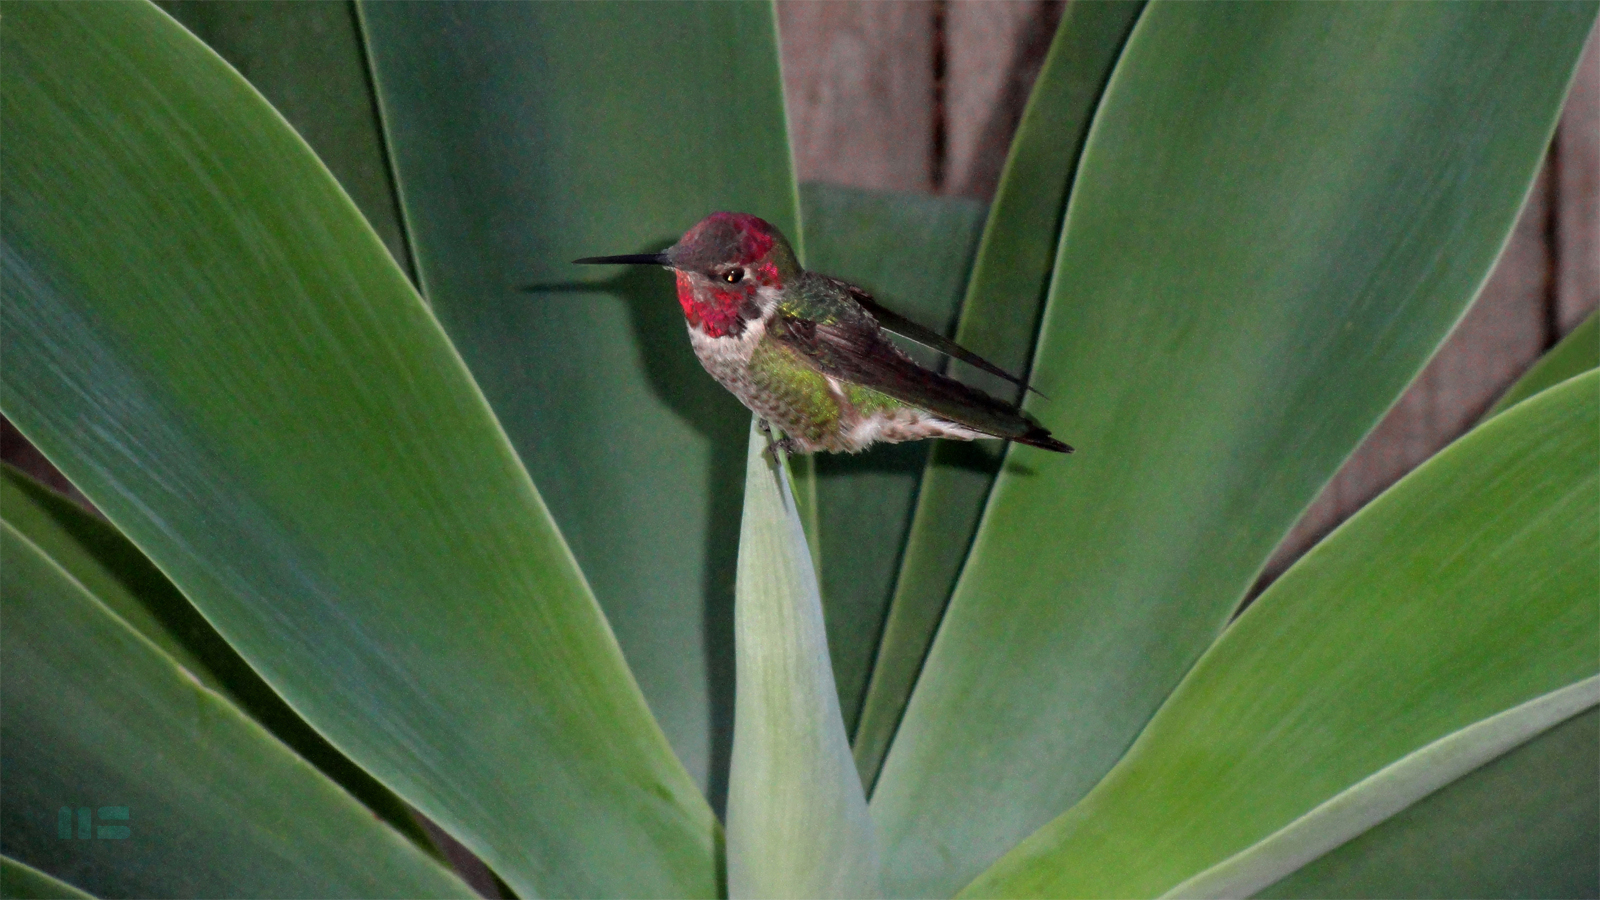 AGAVE SITTER Collectible Hummingbird Photo Print by Mark Smollin